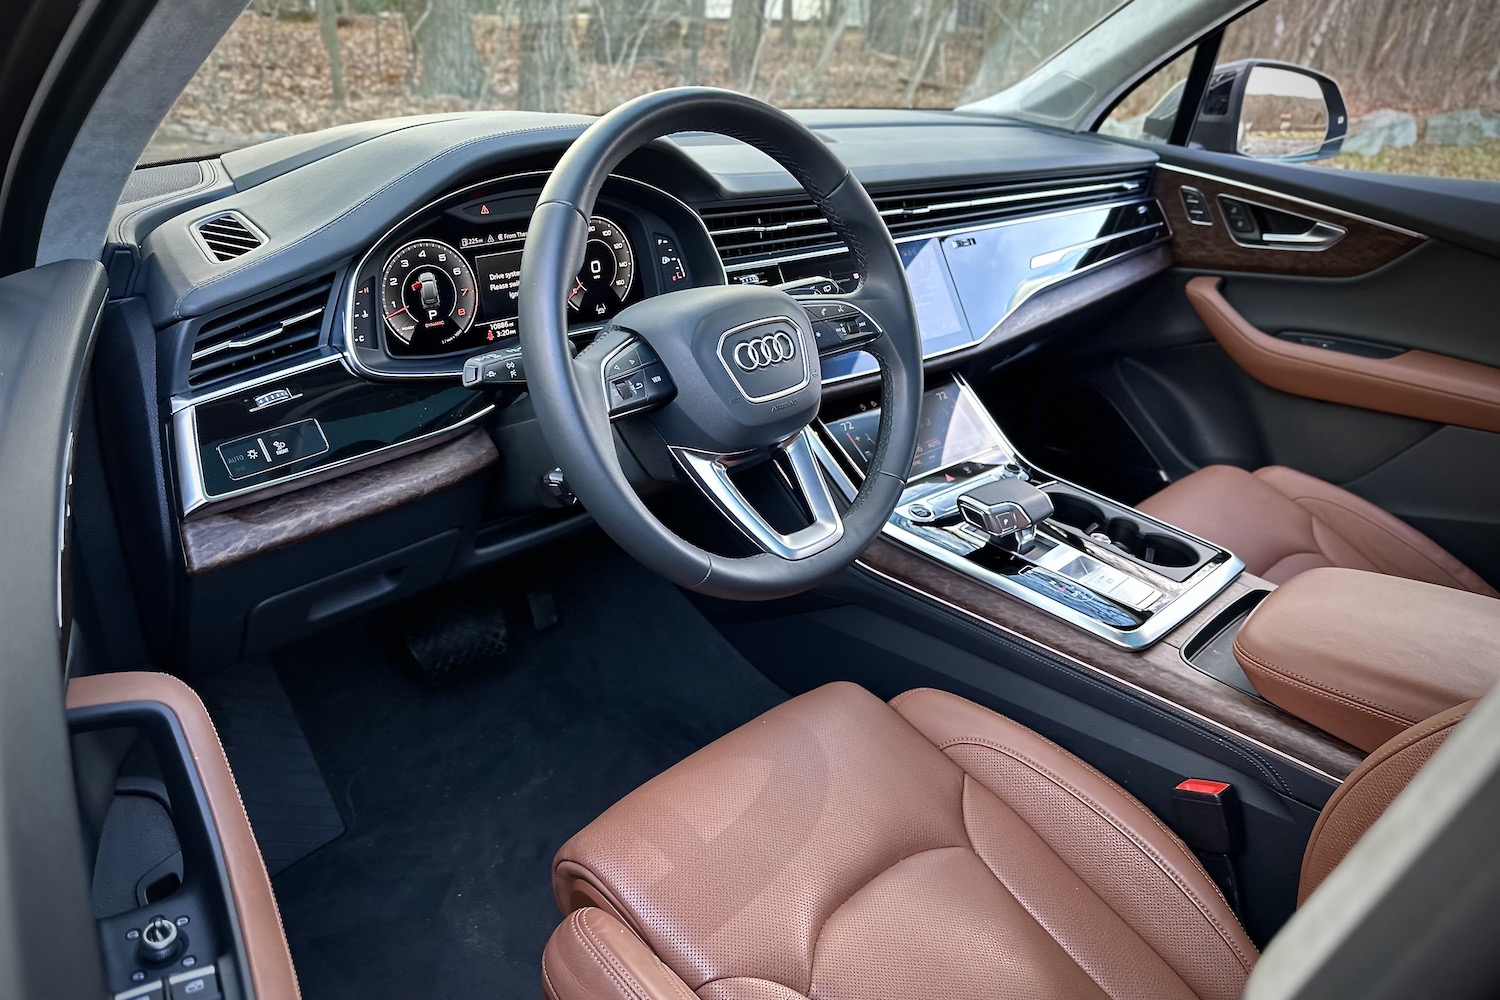 Close up of dashboard and steering wheel in the 2022 Audi Q7 Prestige with trees in the back.